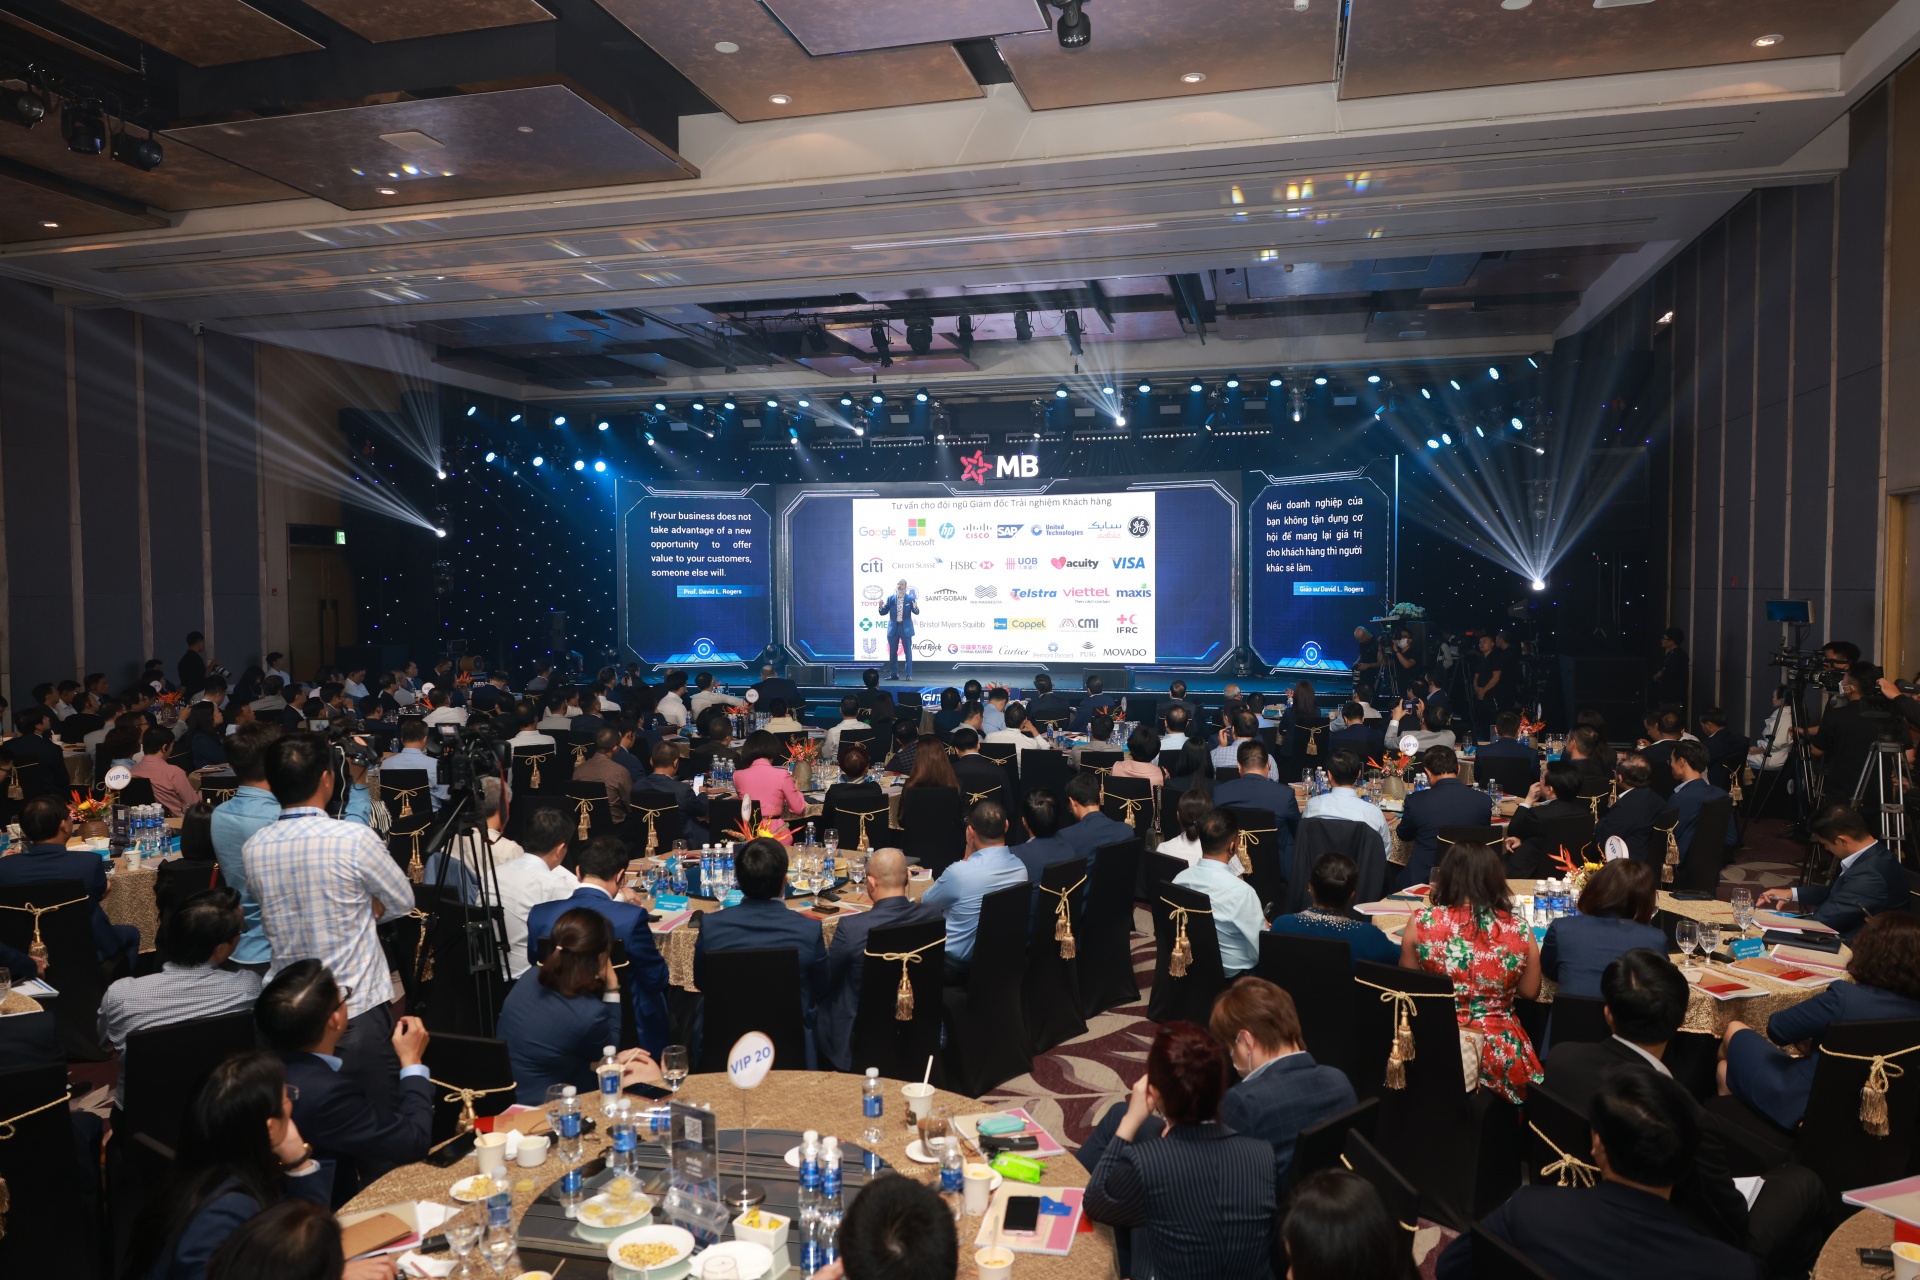 MB spearheads digital transformation dialogue at international conference in Vietnam